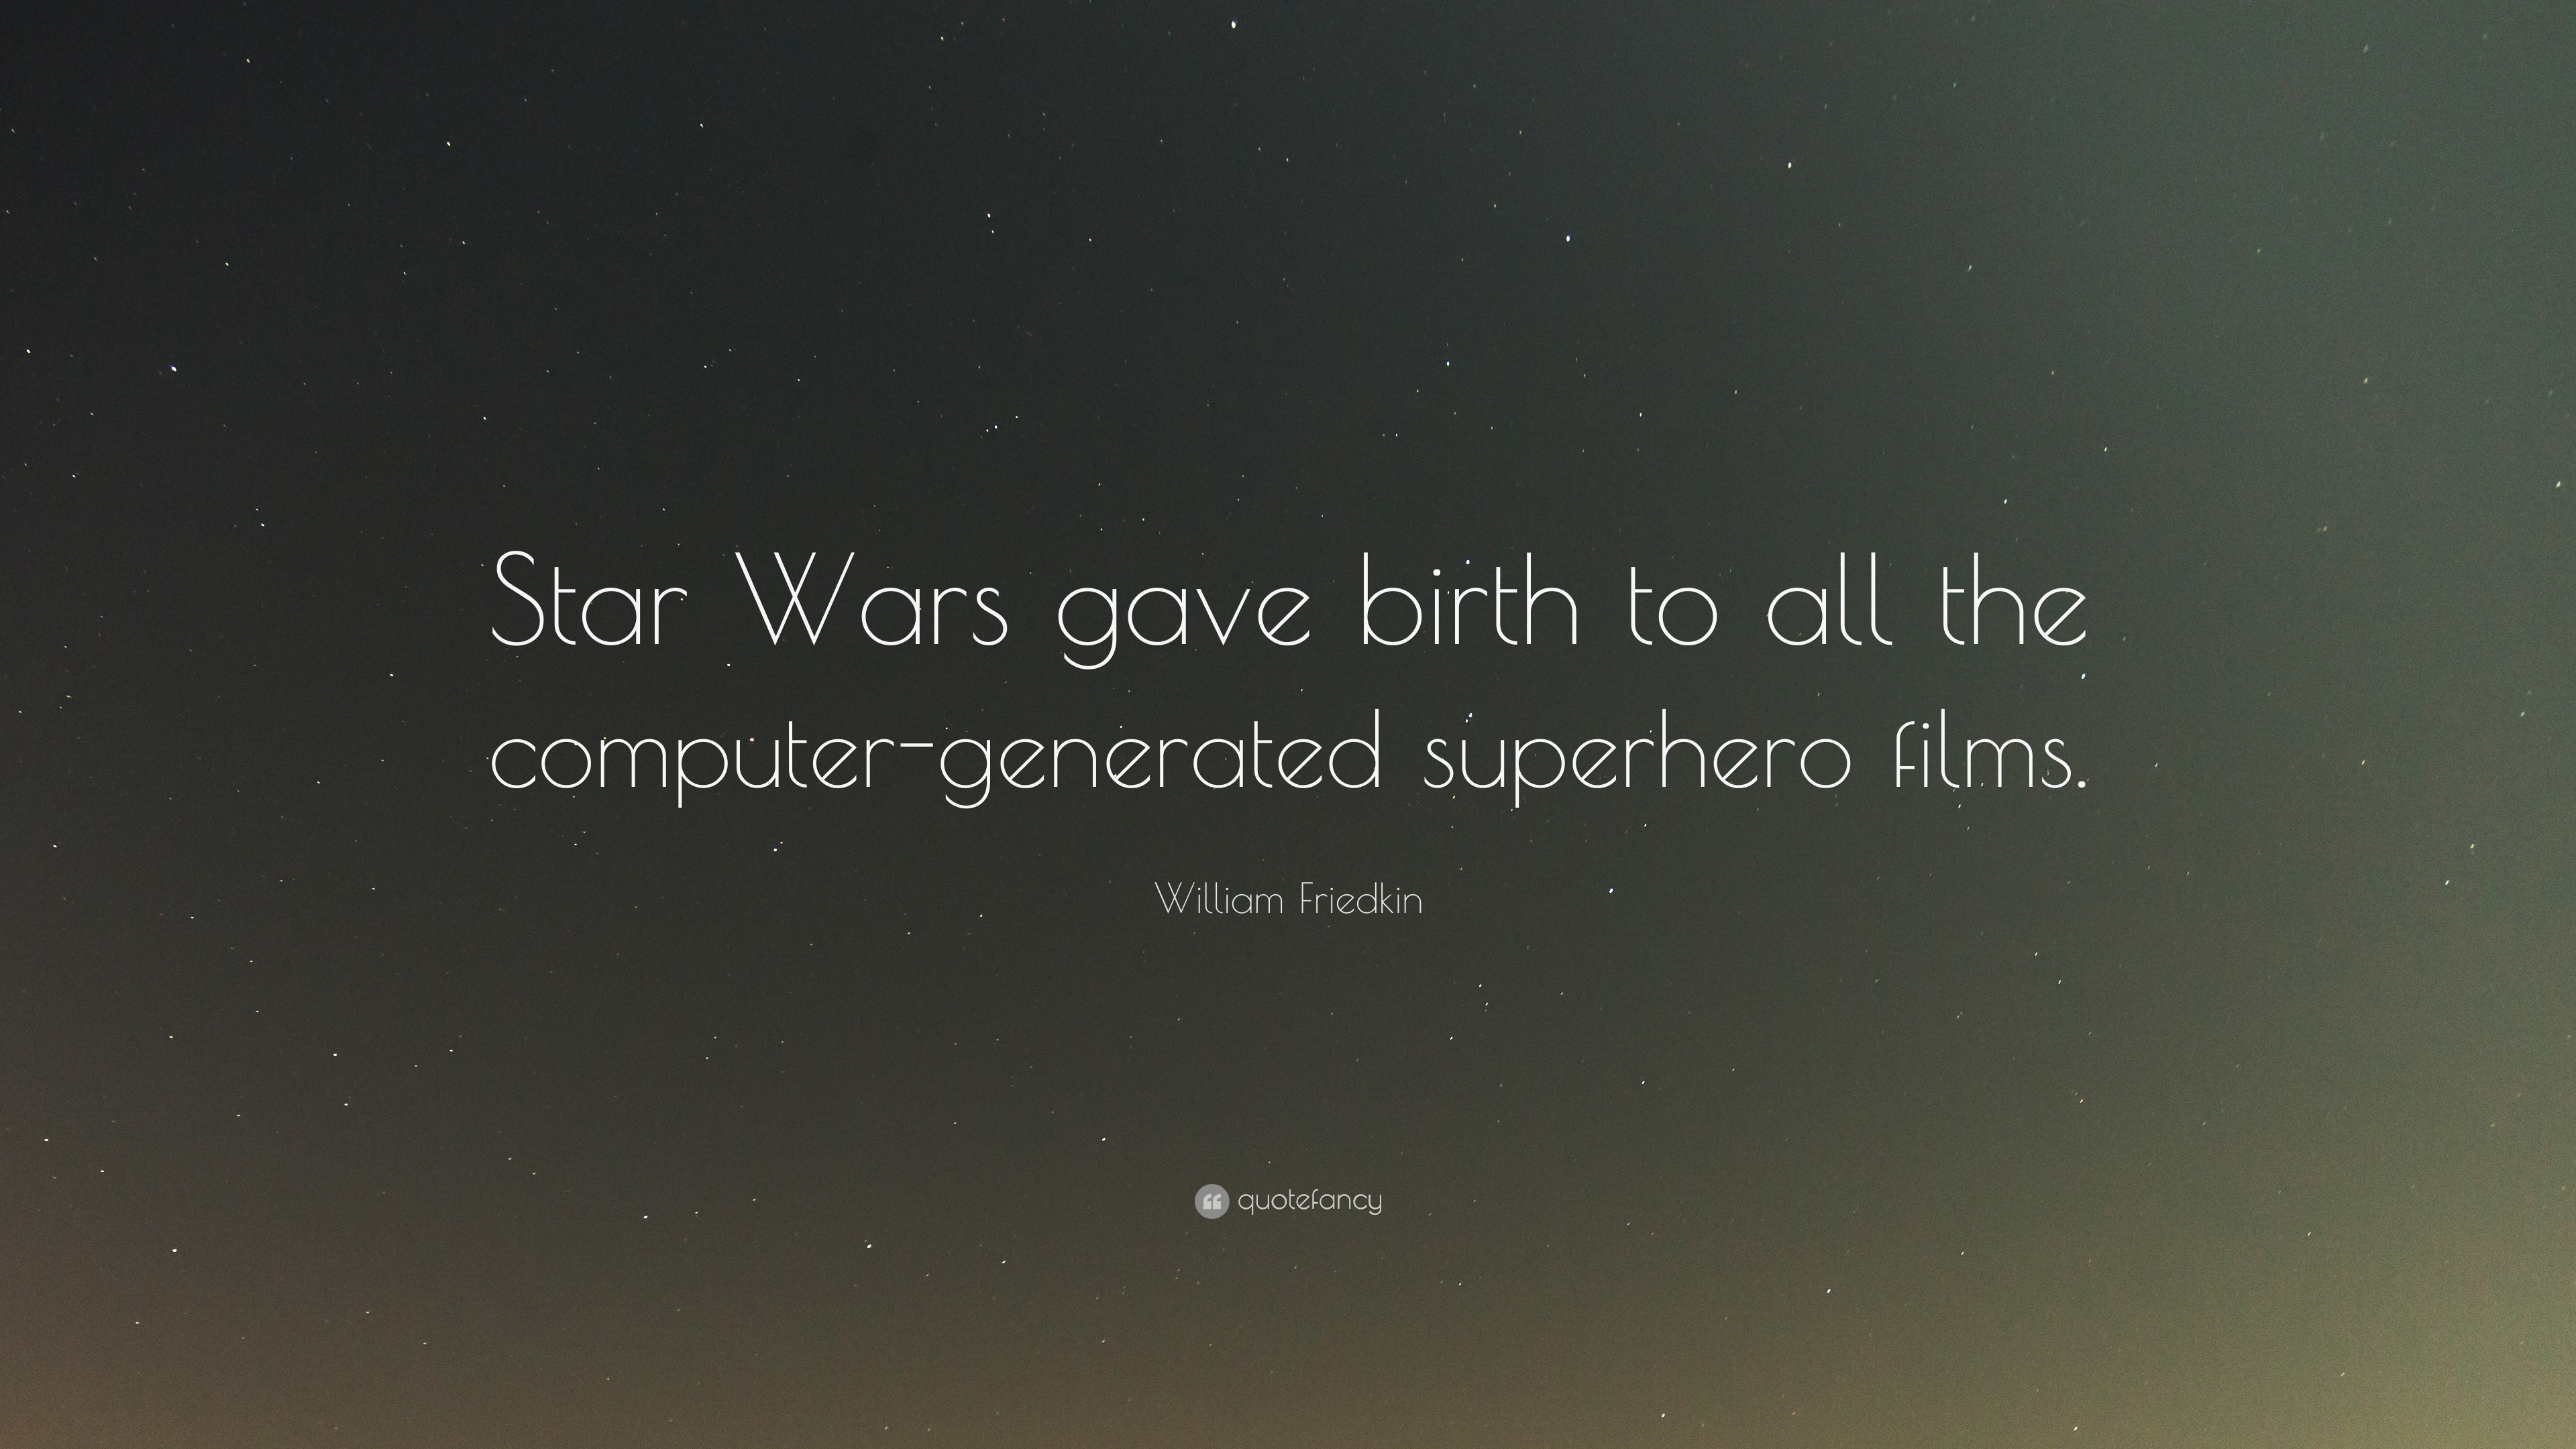 William Friedkin Quote: “Star Wars gave birth to all the computer-generated  superhero films.”